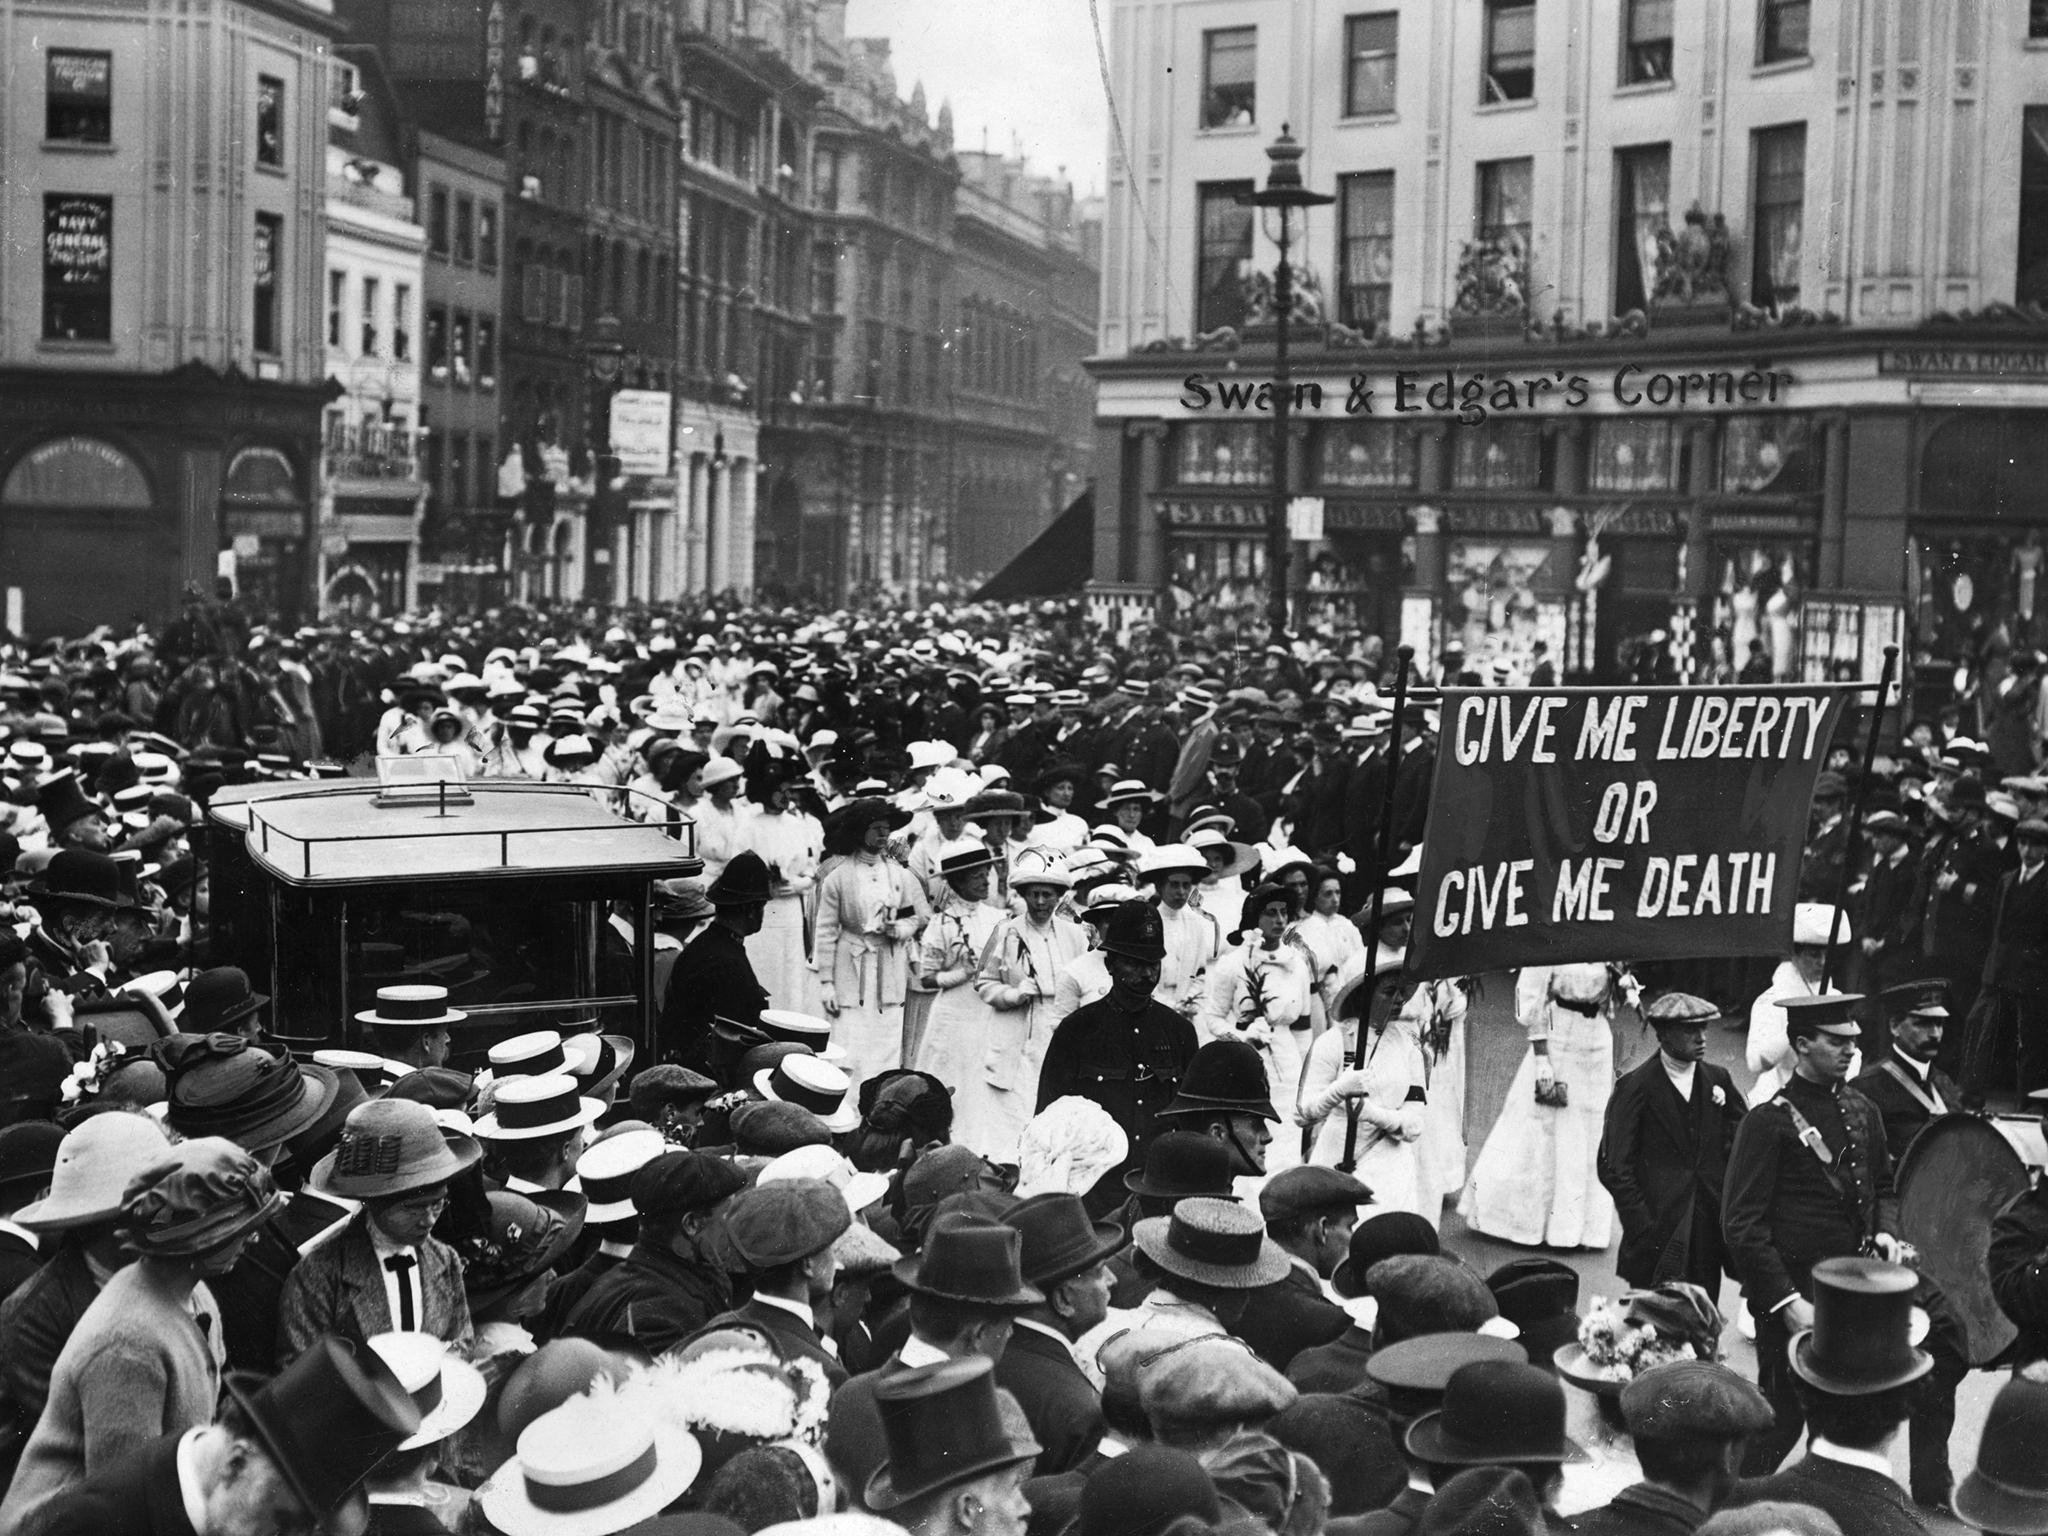 Women’s suffrage After 100 years since millions of women got the vote